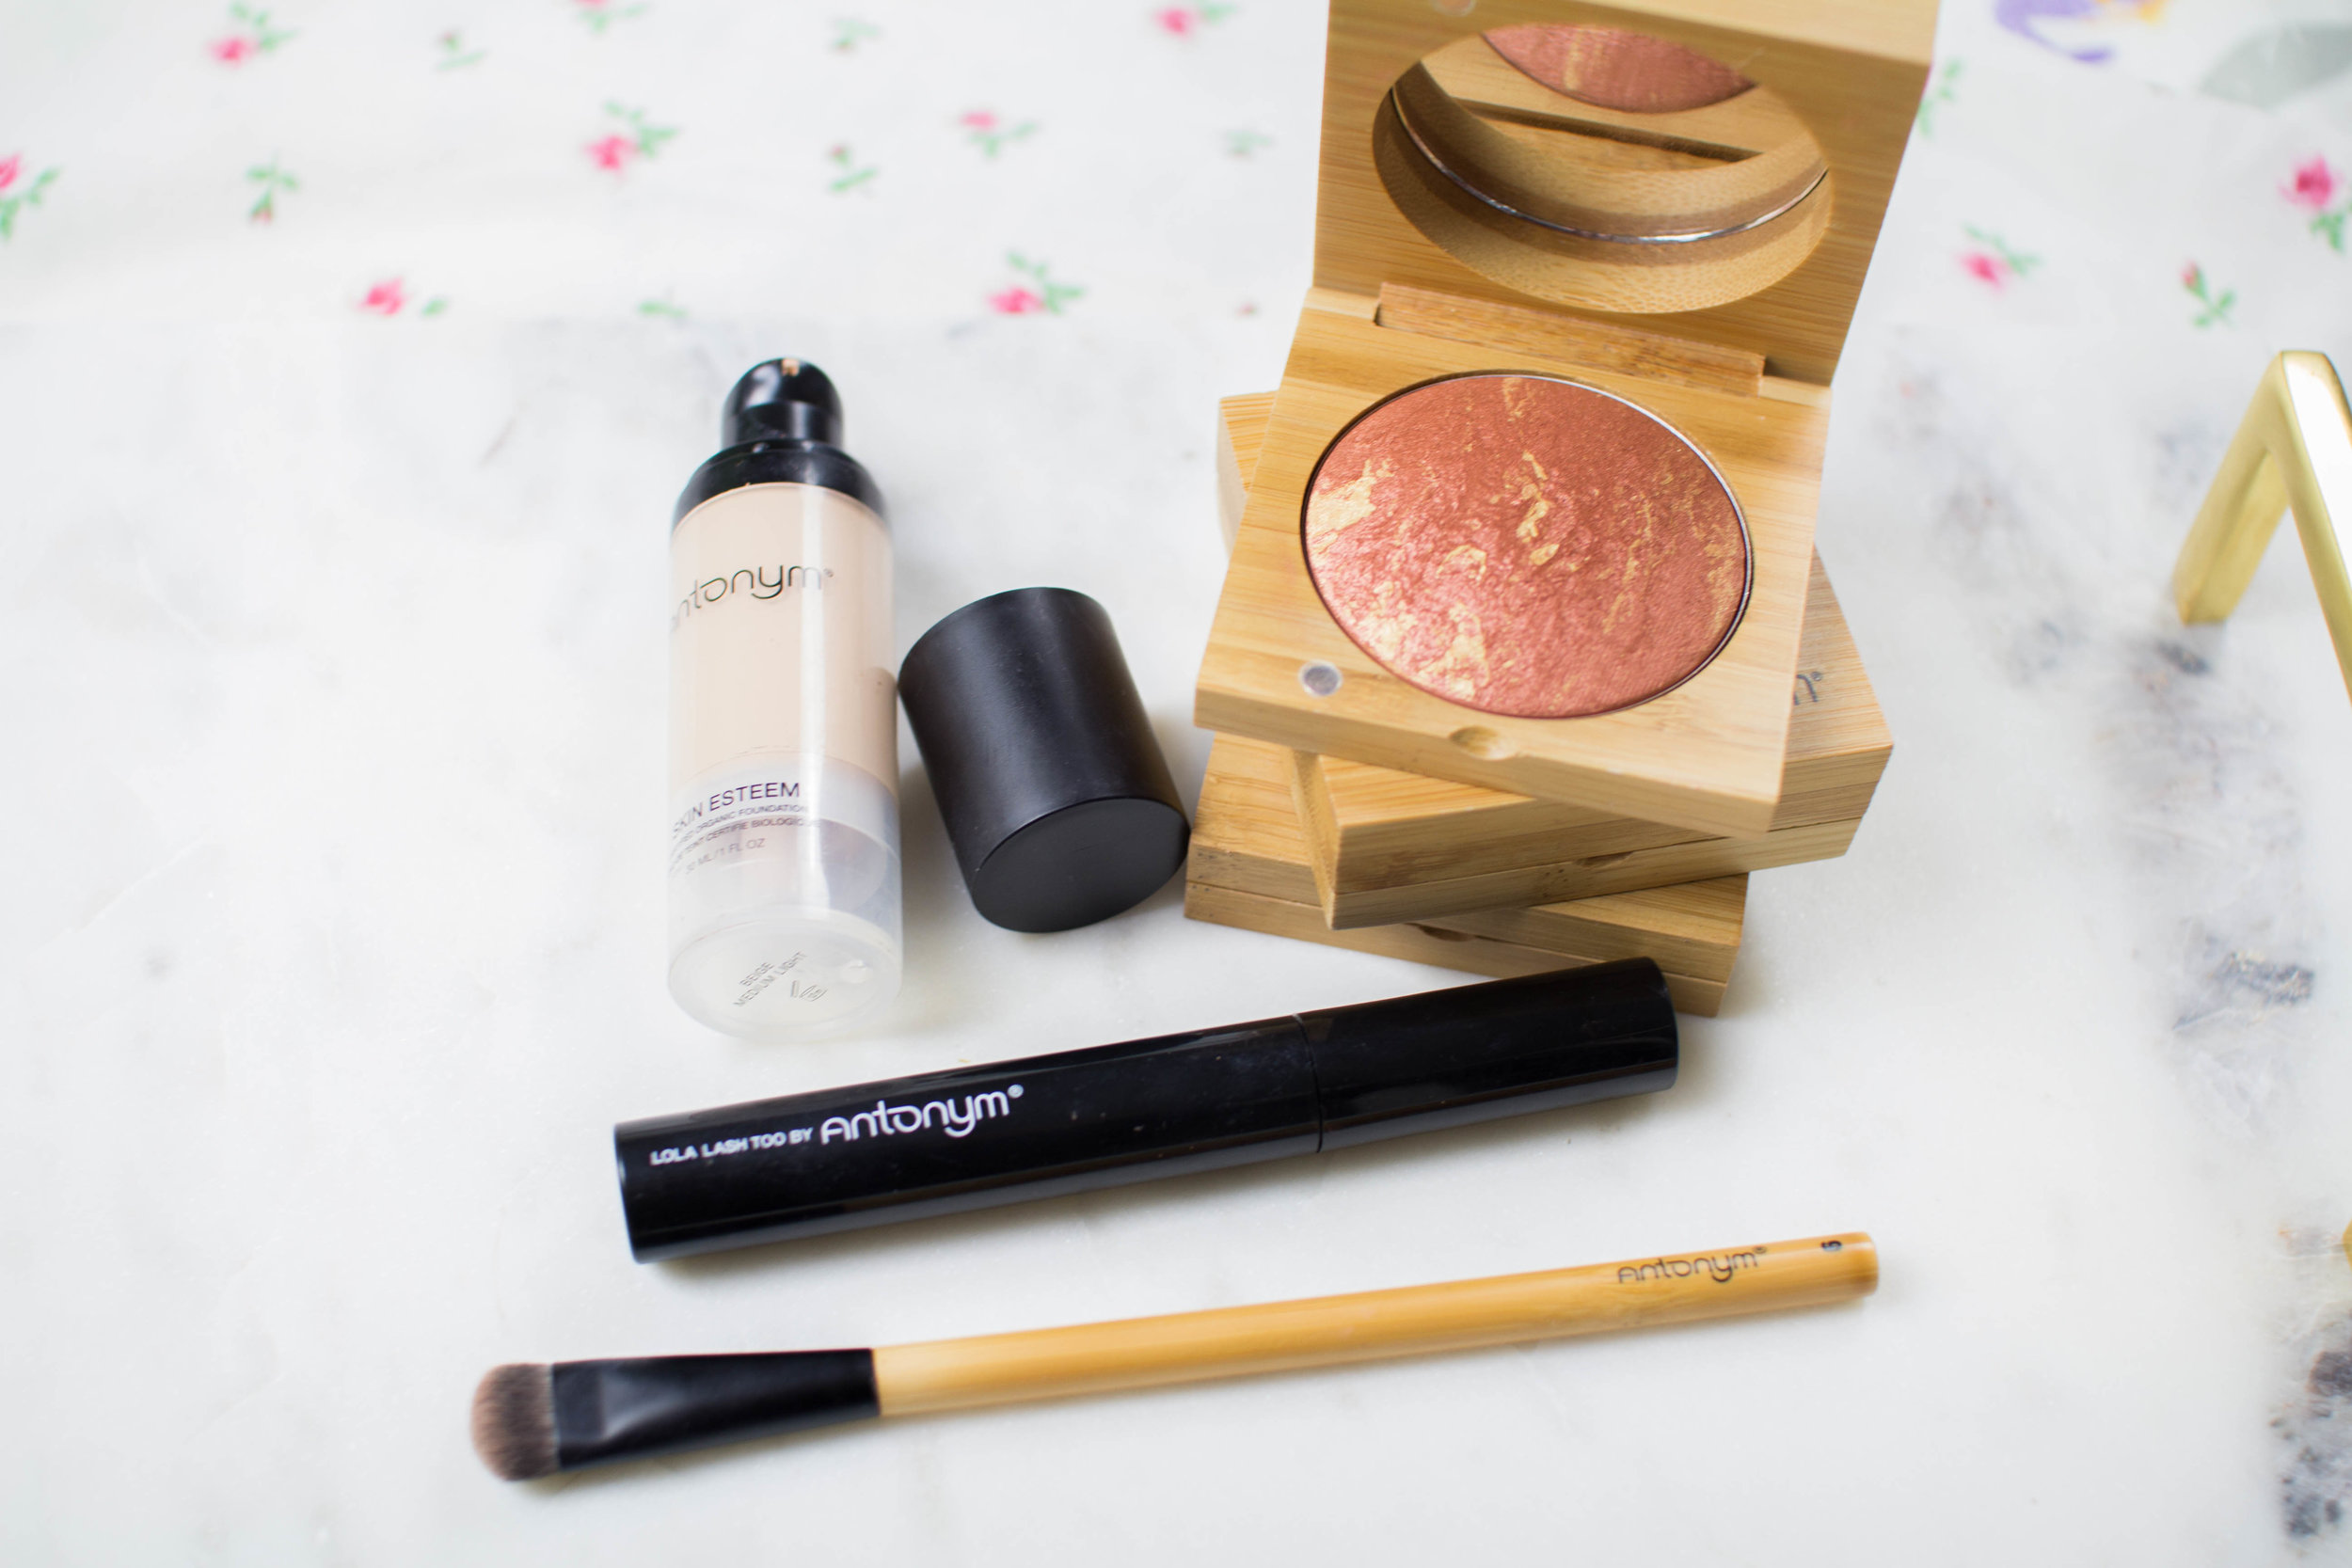 Vegan, Gluten Free and Organic Makeup Products